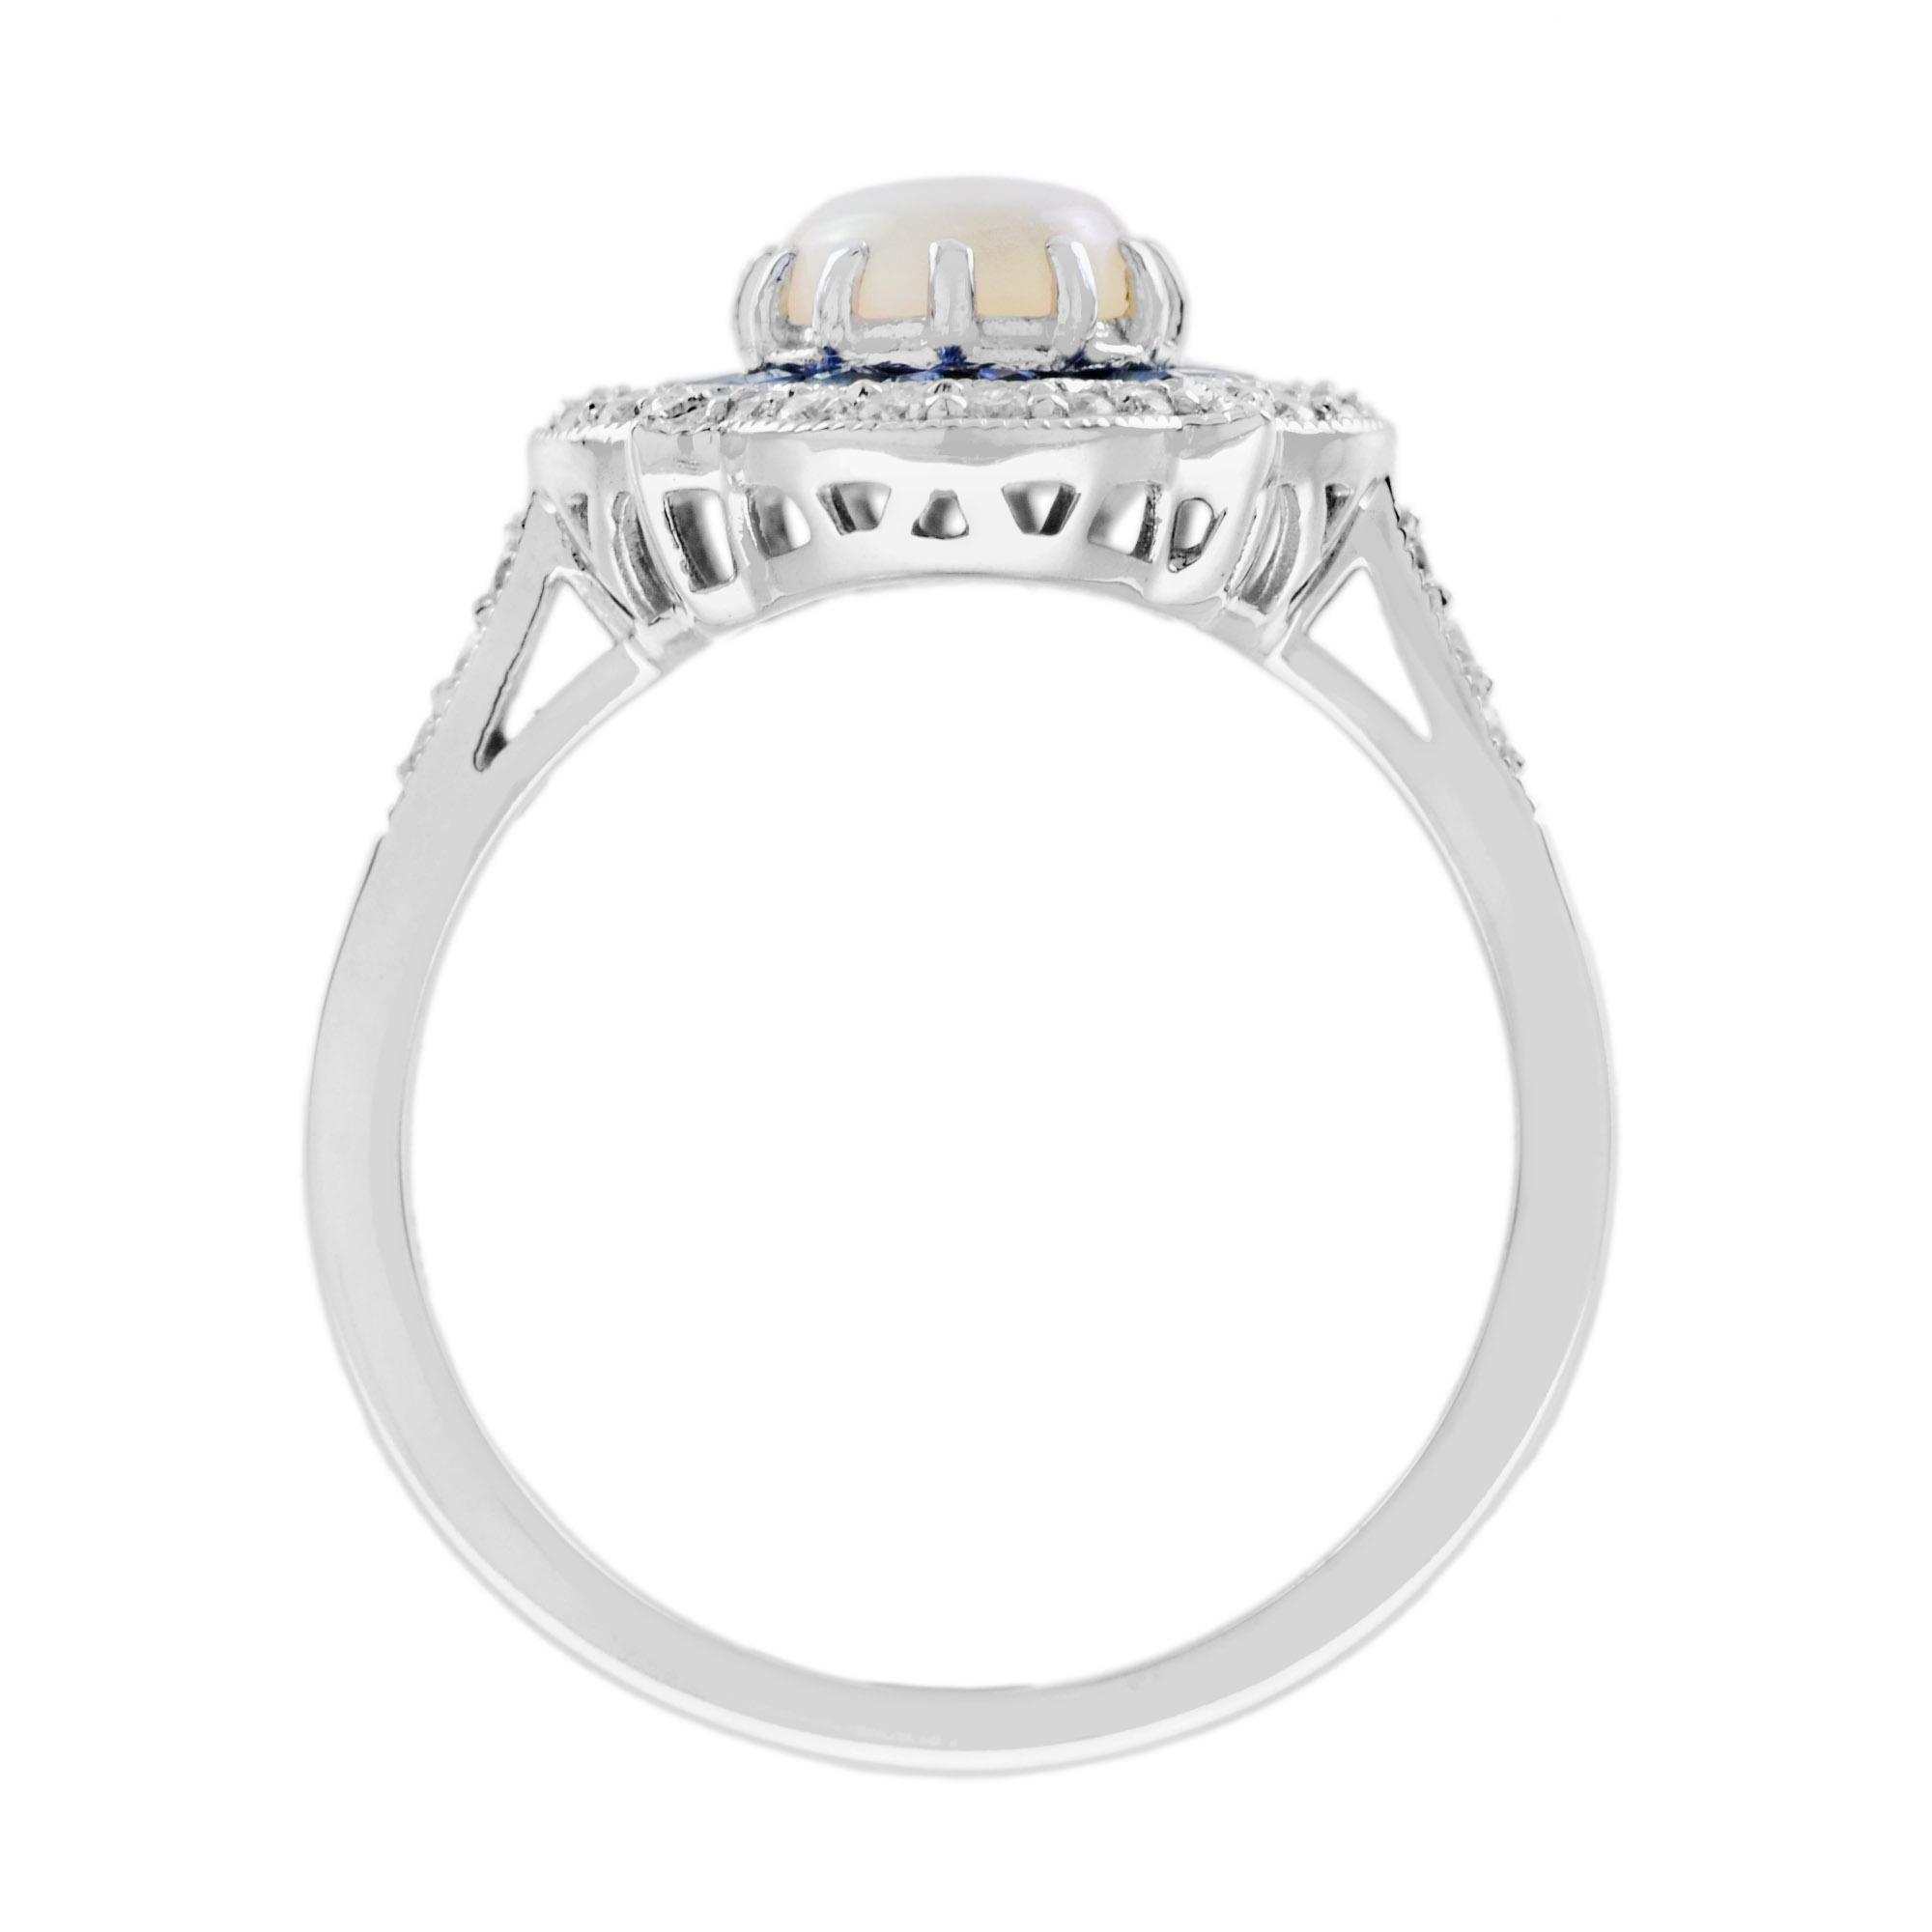 Oval Opal with Sapphire Diamond Art Deco Style Halo Ring in 14K White Gold For Sale 2